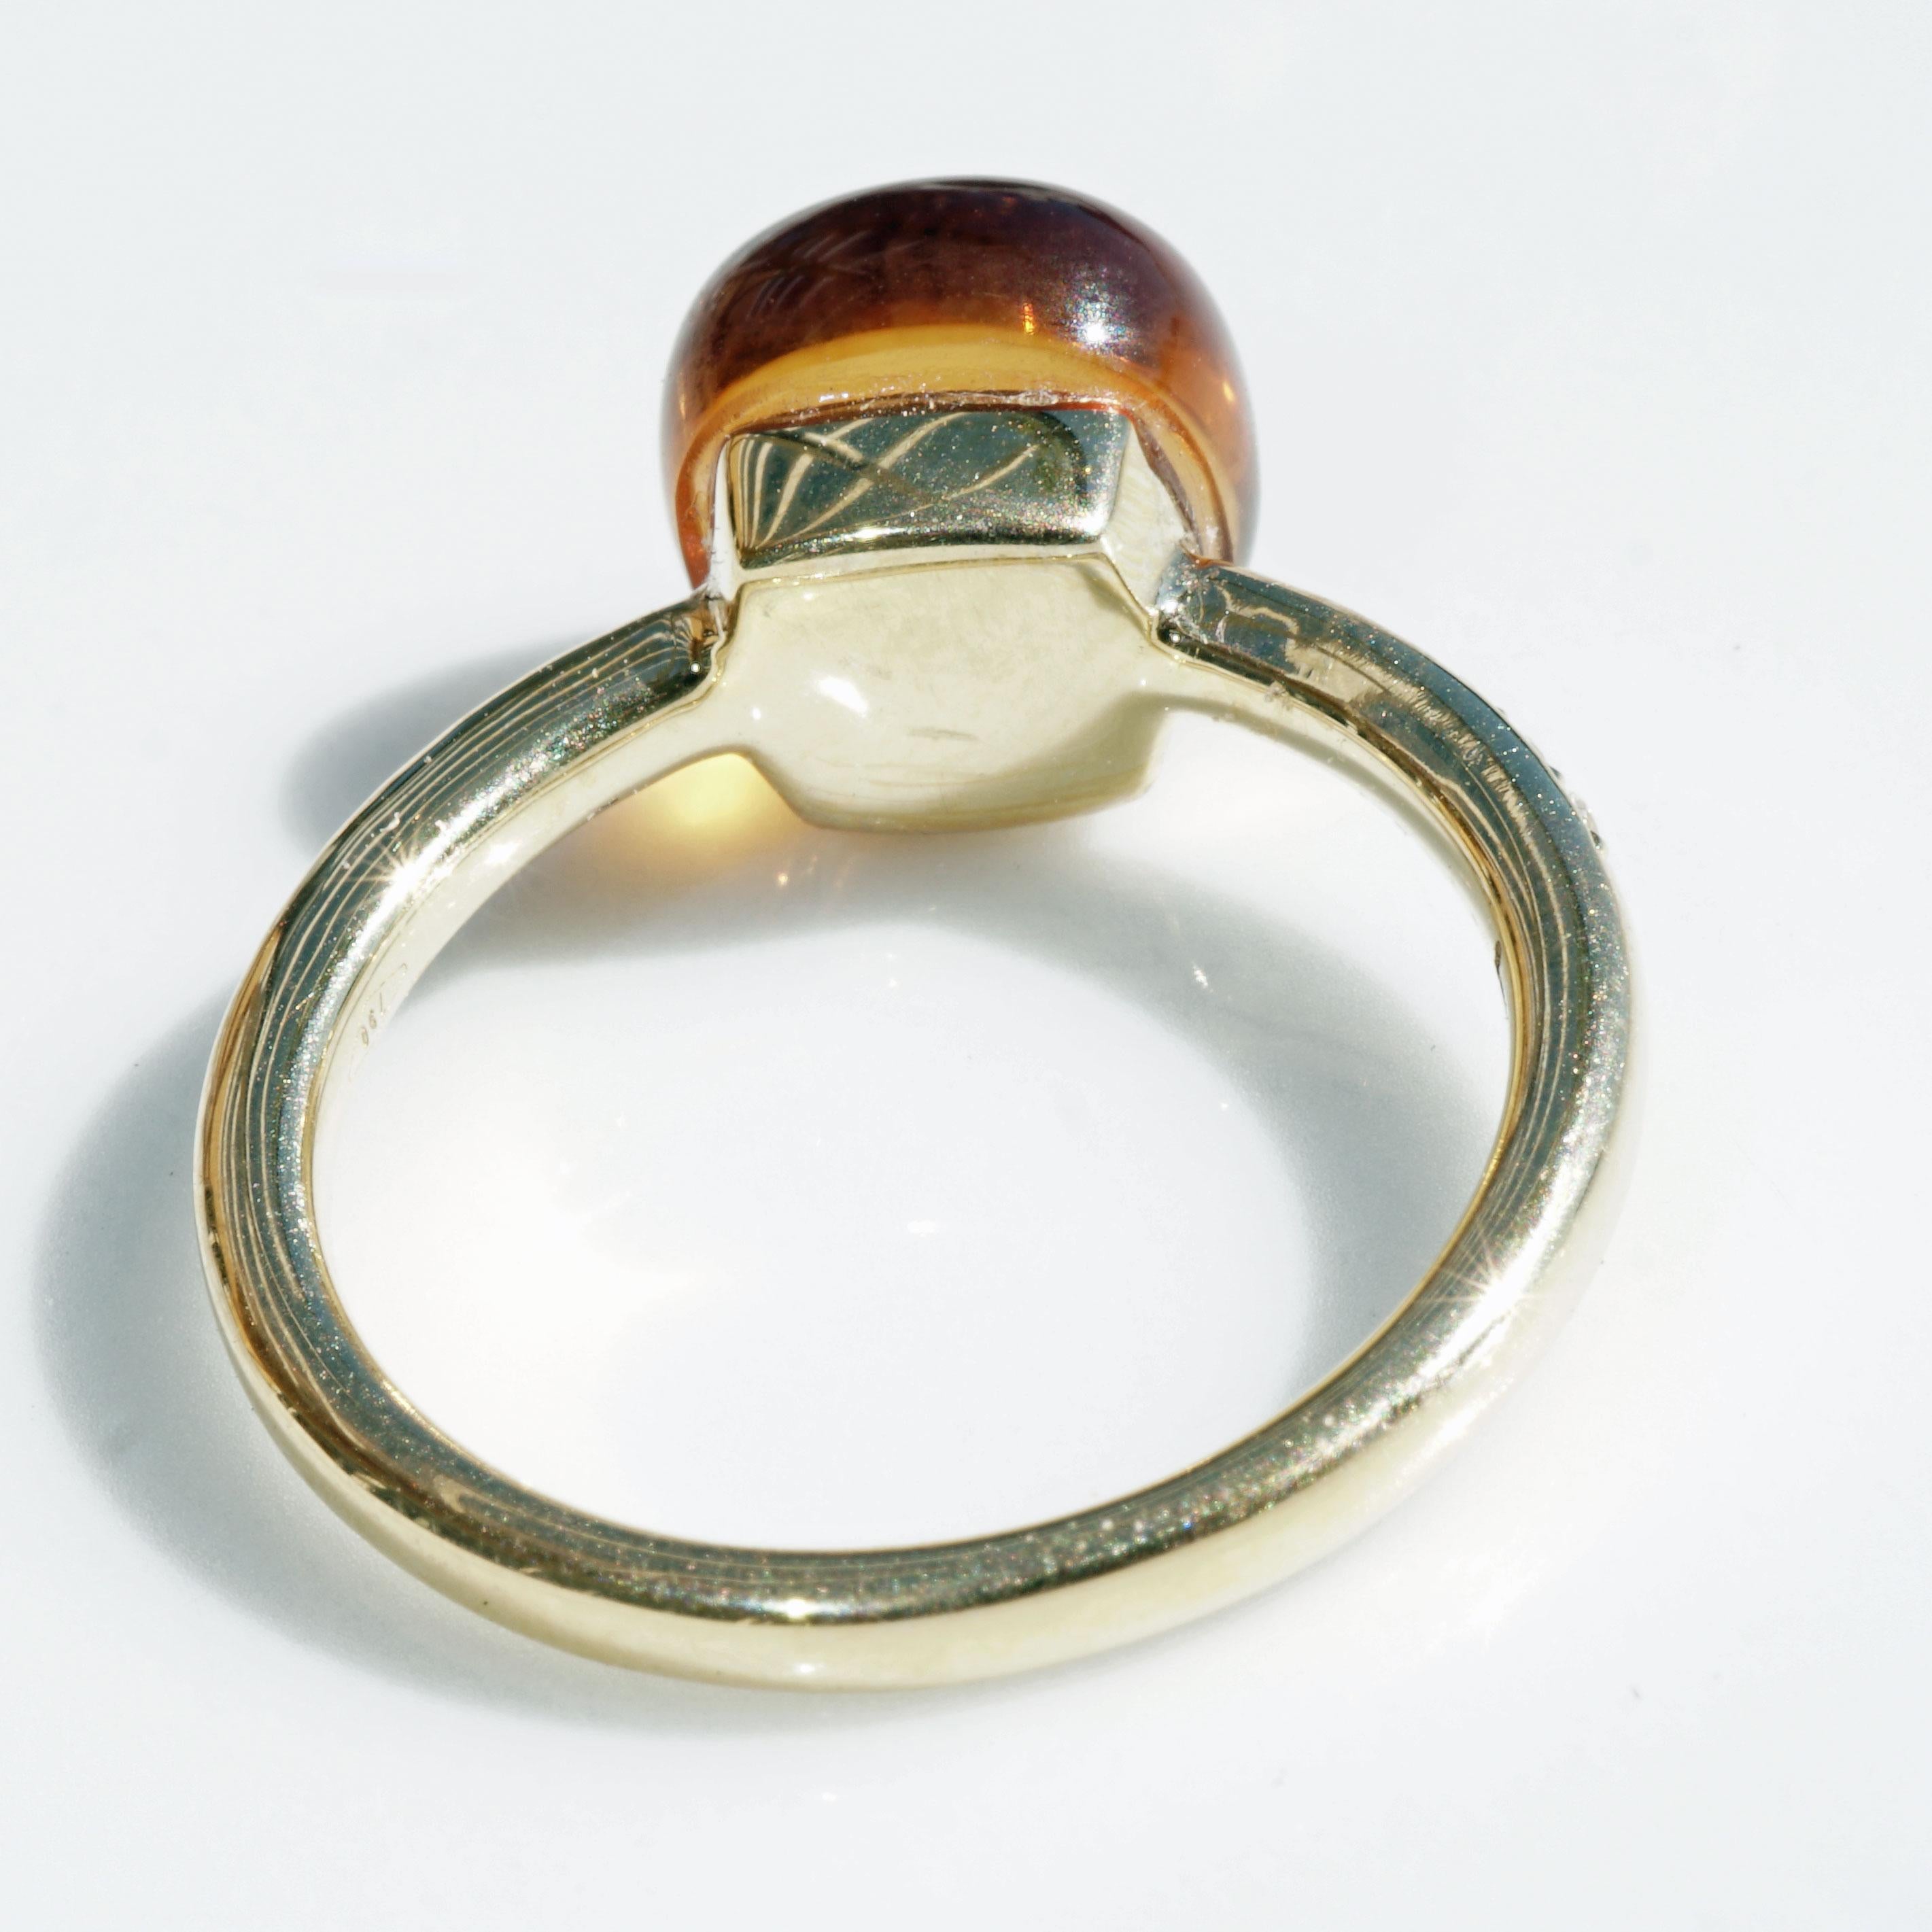 Brilliant Cut Citrine Brilliant Ring Made by Italian Goldsmith Co. great Design modern Style For Sale